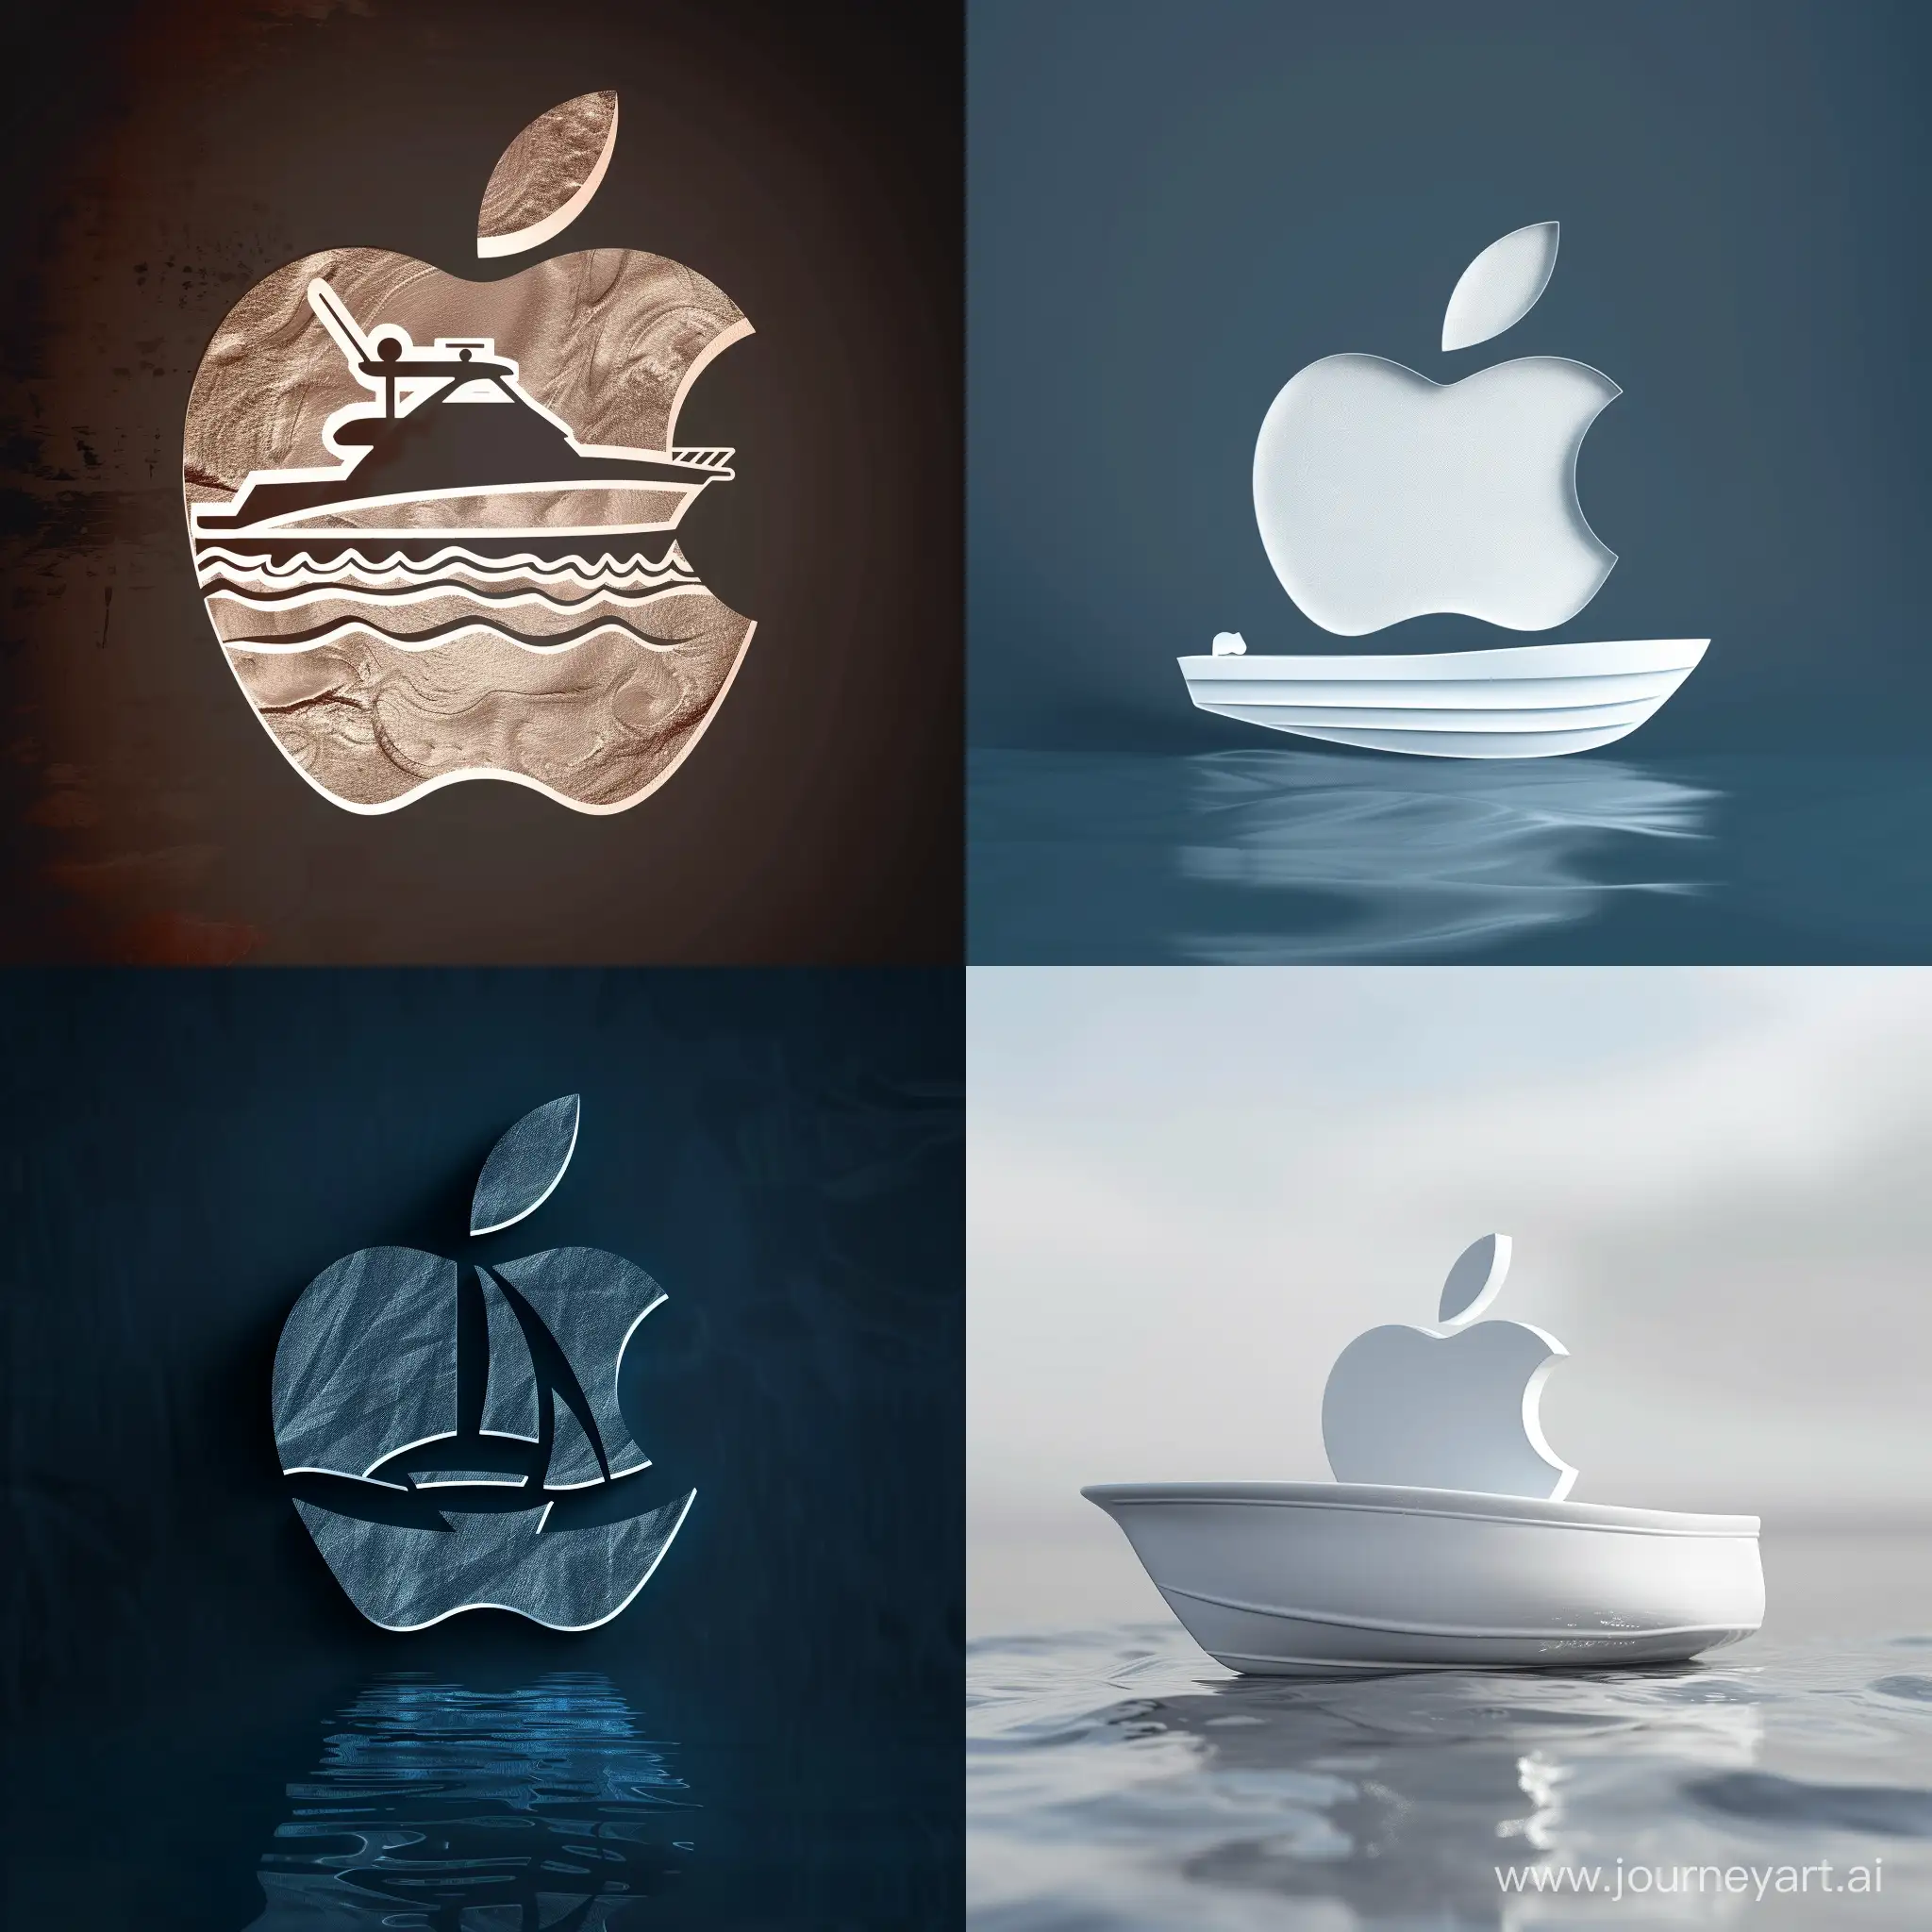 Nautical-Elegance-Meets-Orchard-Charm-Boat-and-Apple-Logo-Fusion